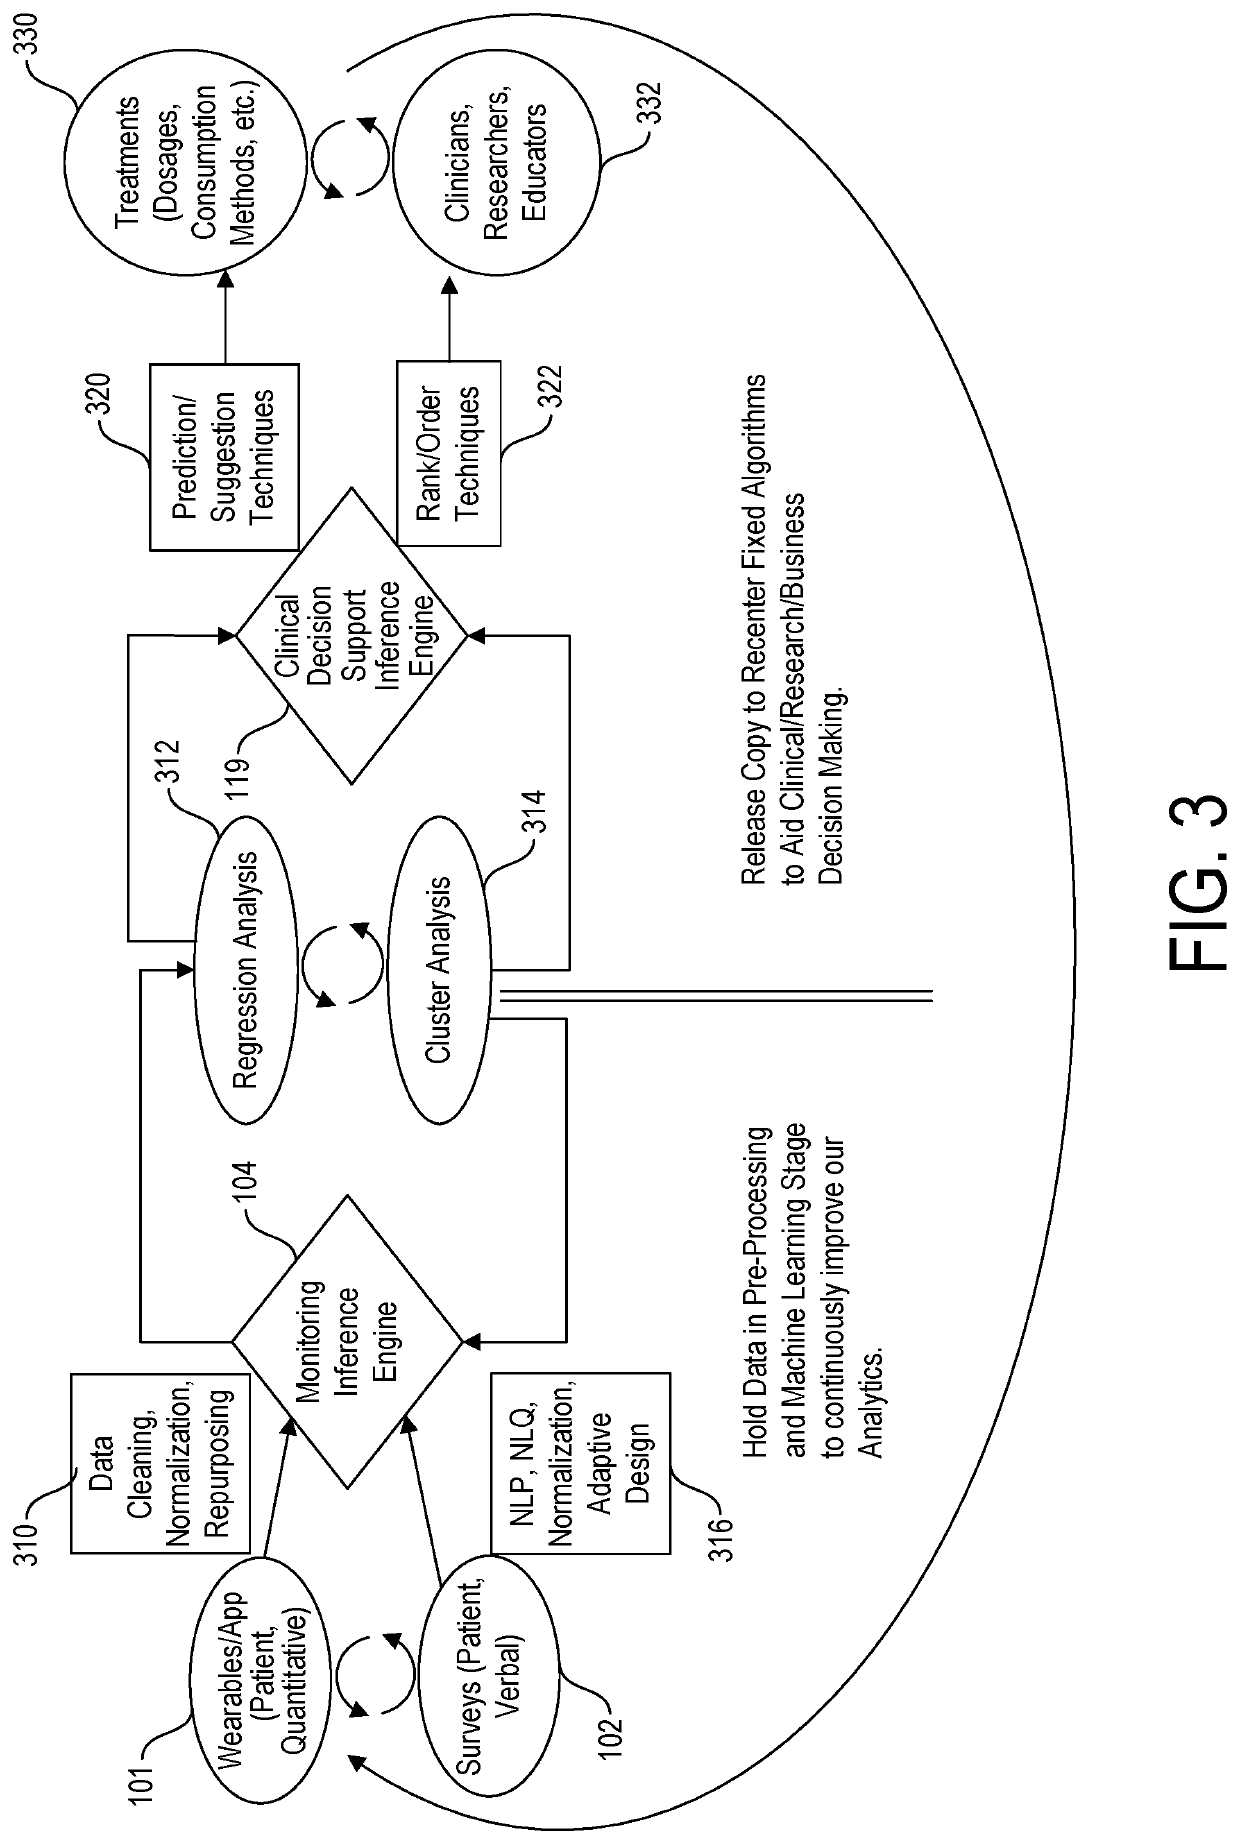 System for integrating data for clinical decisions